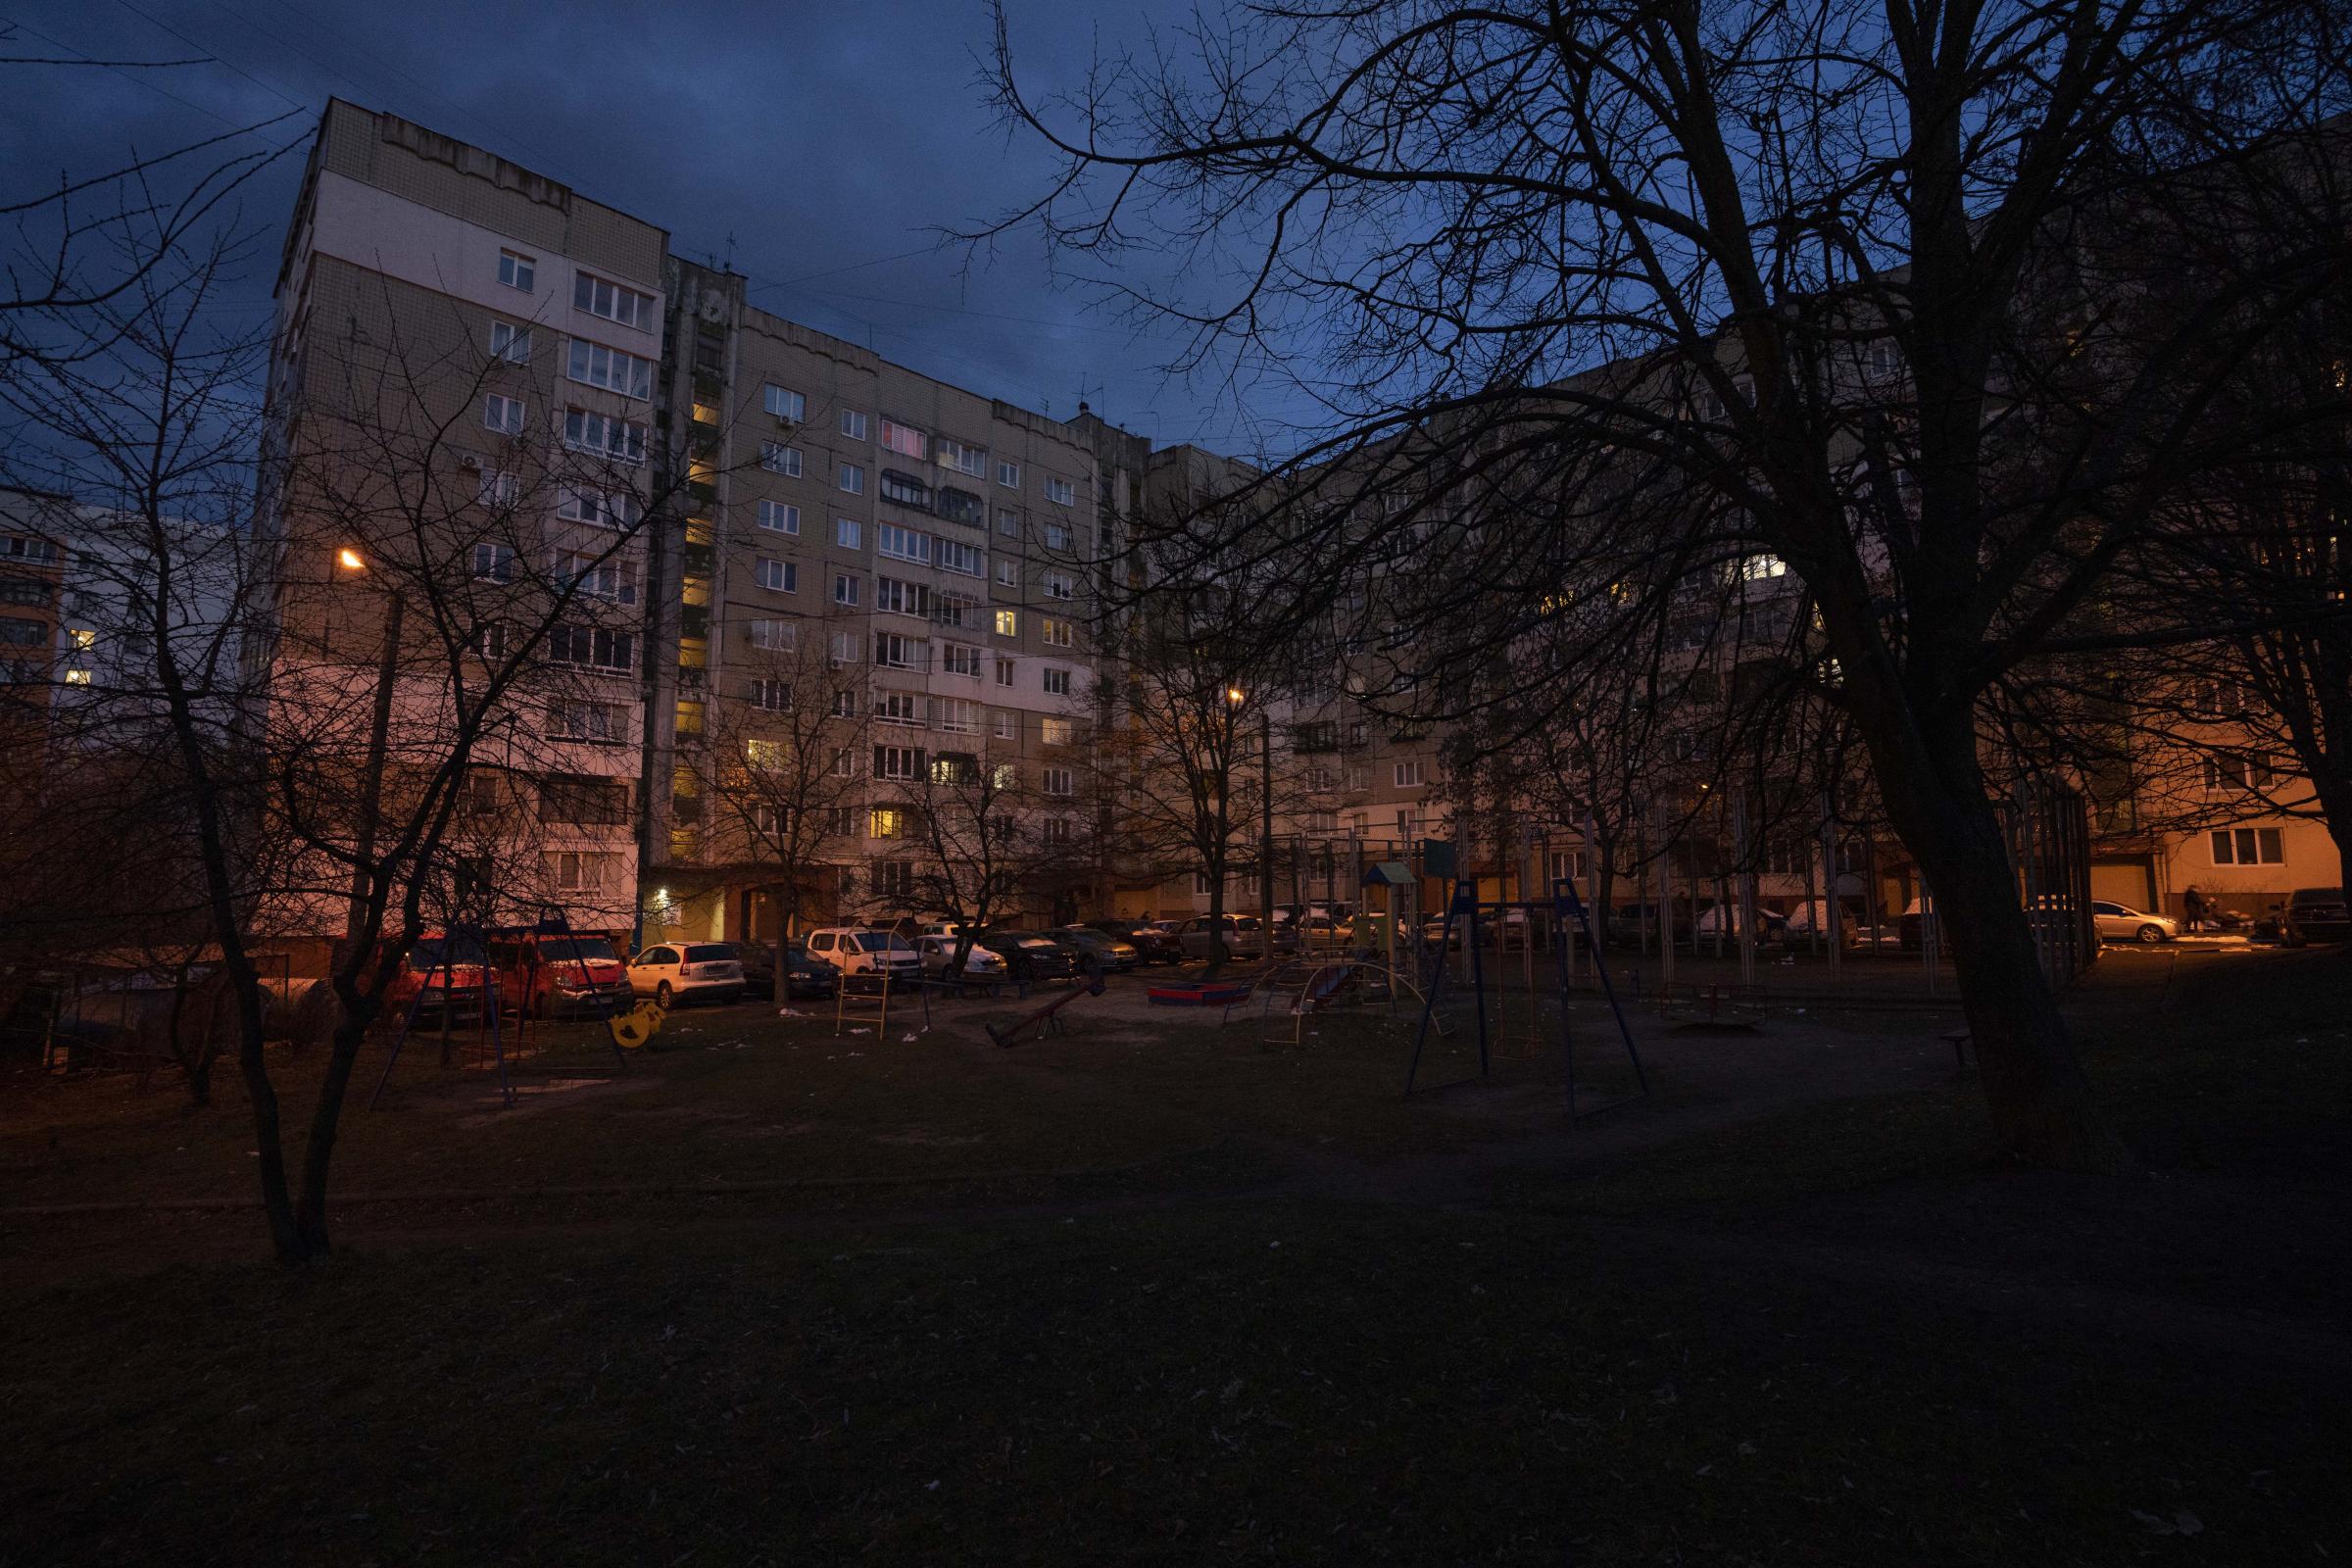 Stories of Ukraine's families during war - An apartment building that holds families from some of...